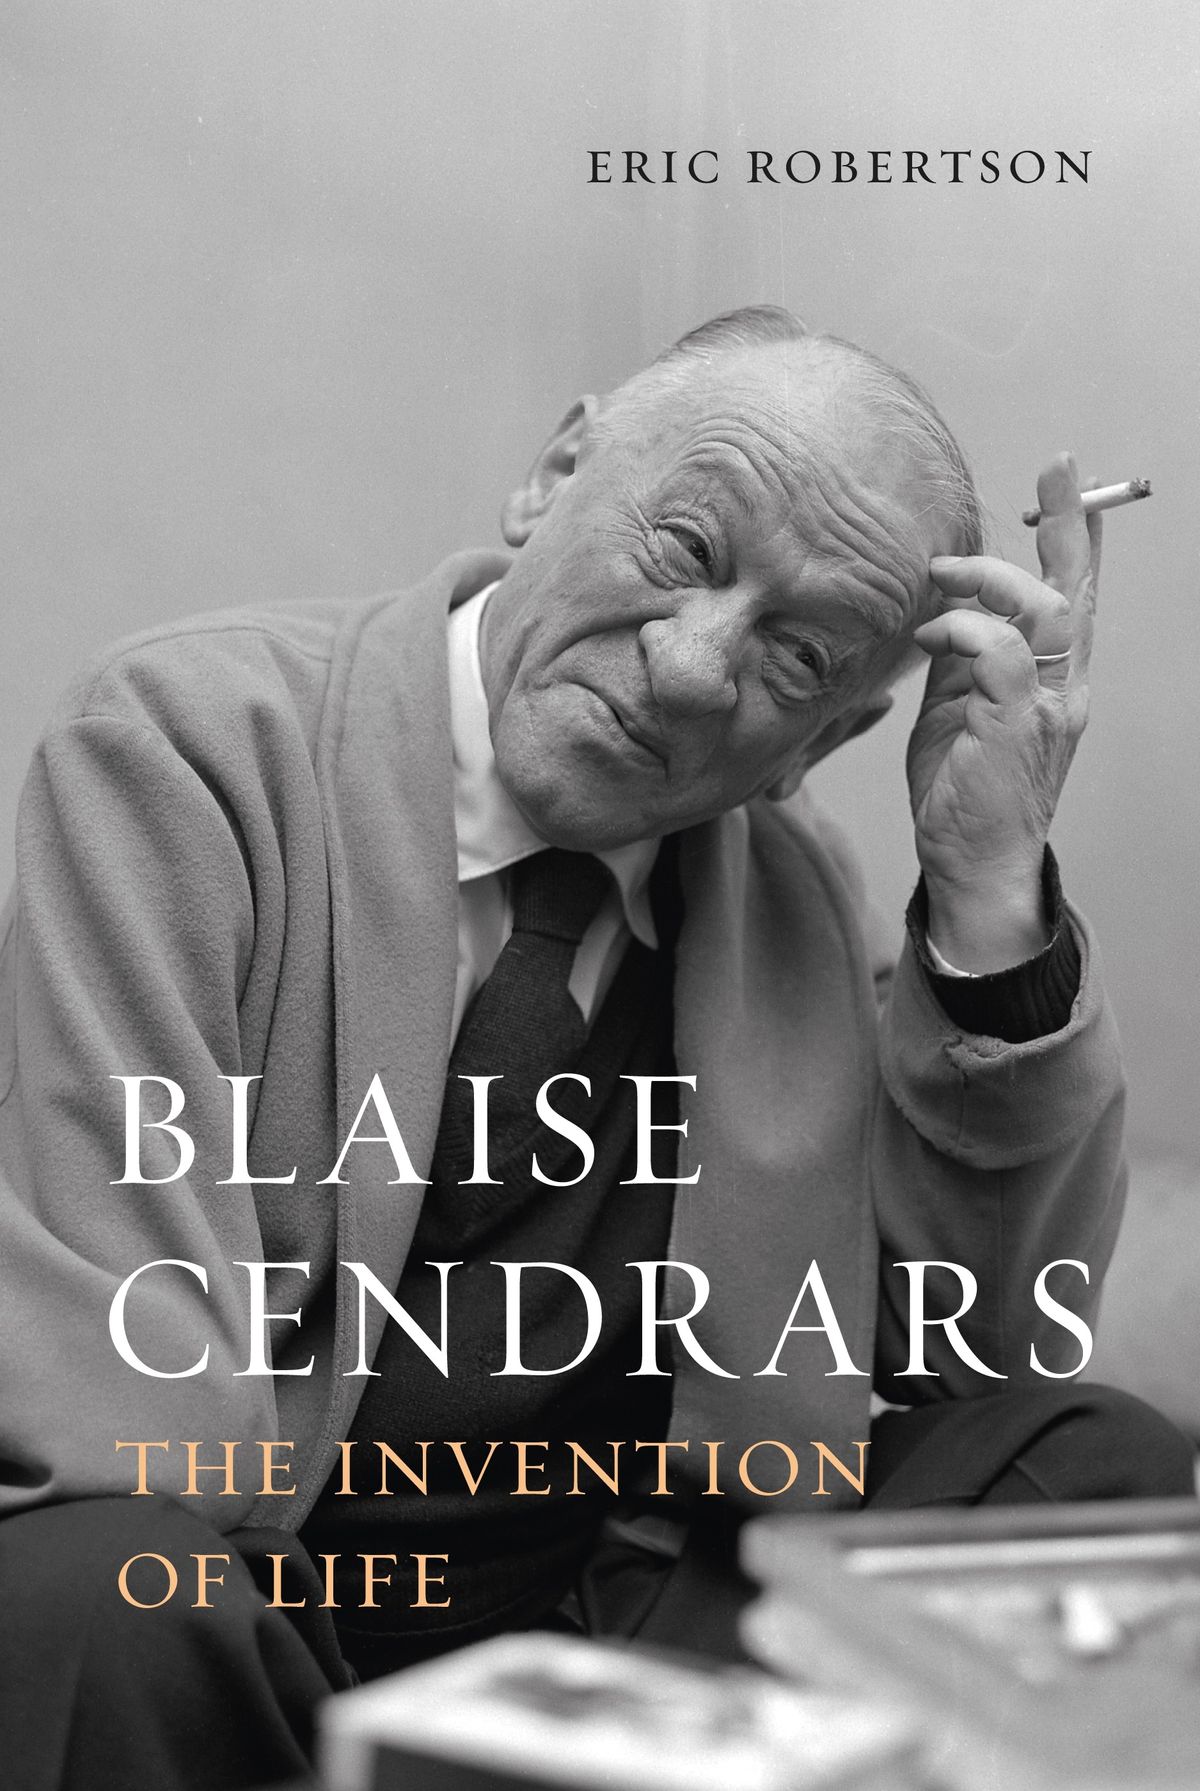 Blaise Cendrars, The Invention of Life, by Eric Robertson. Courtesy Reaktion Books